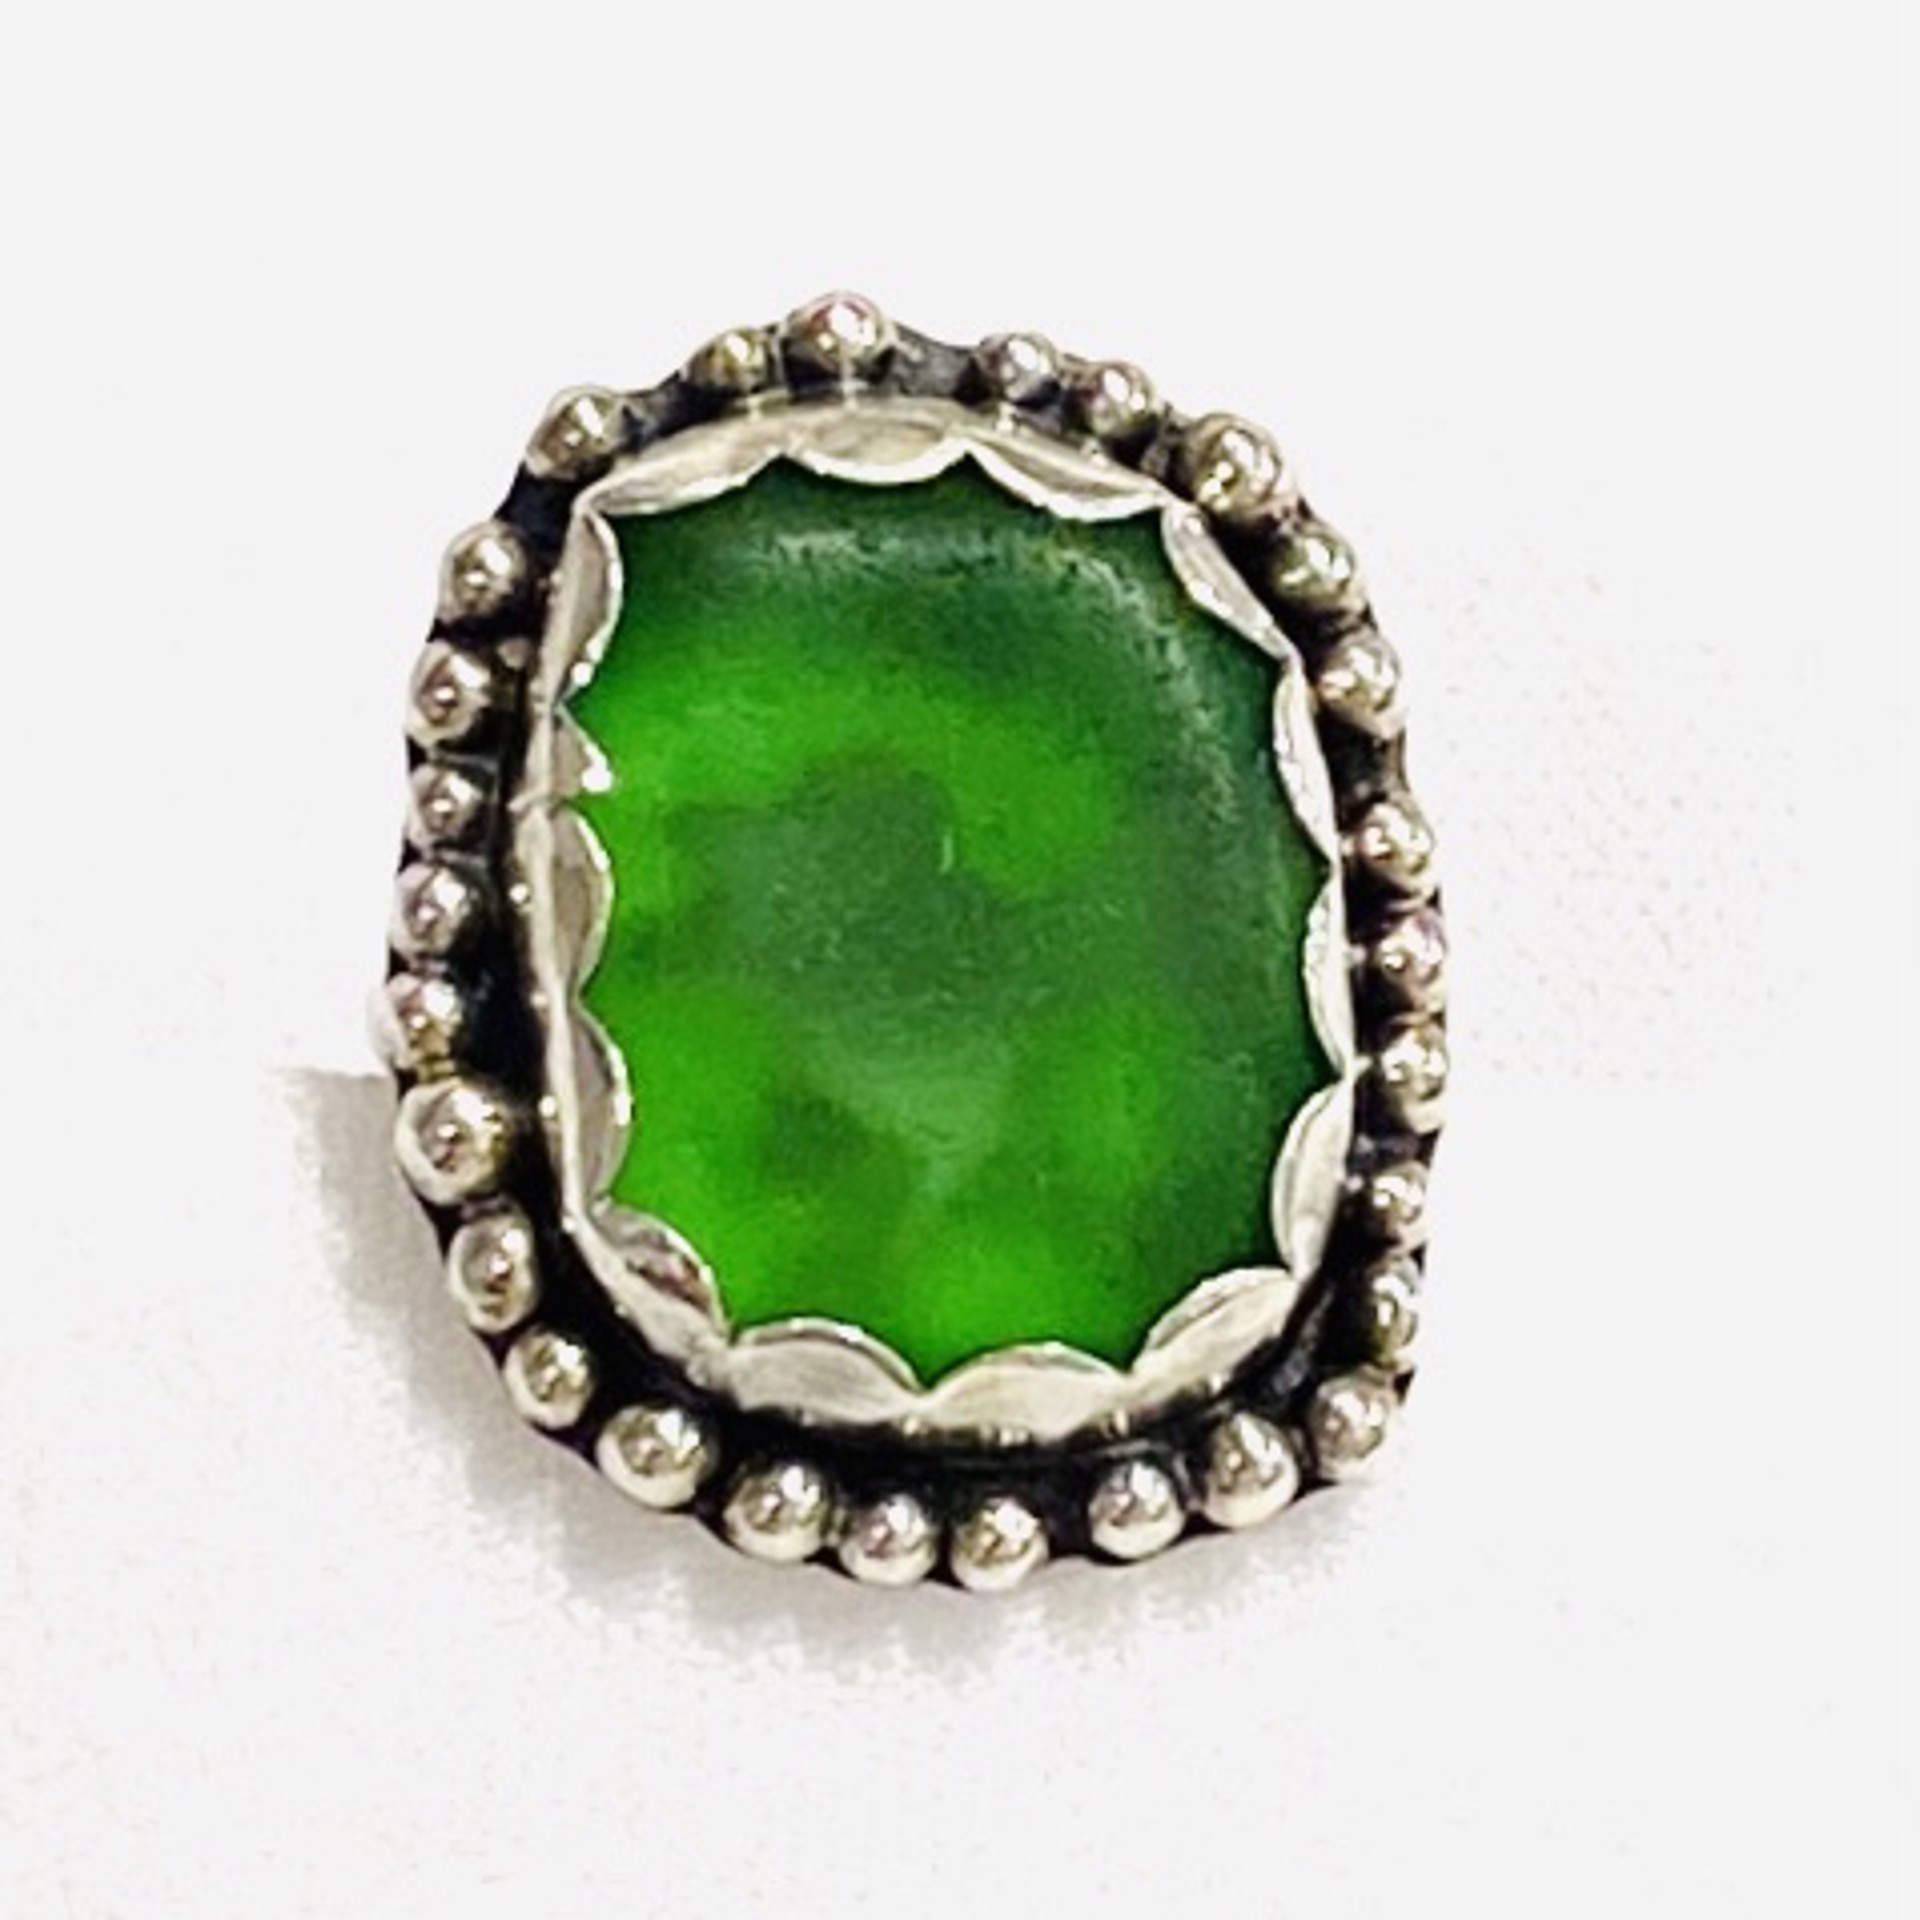 Dark Green Sea Glass Ring, with Picture Cut Out sz6.5 AB20-3 by Anne Bivens